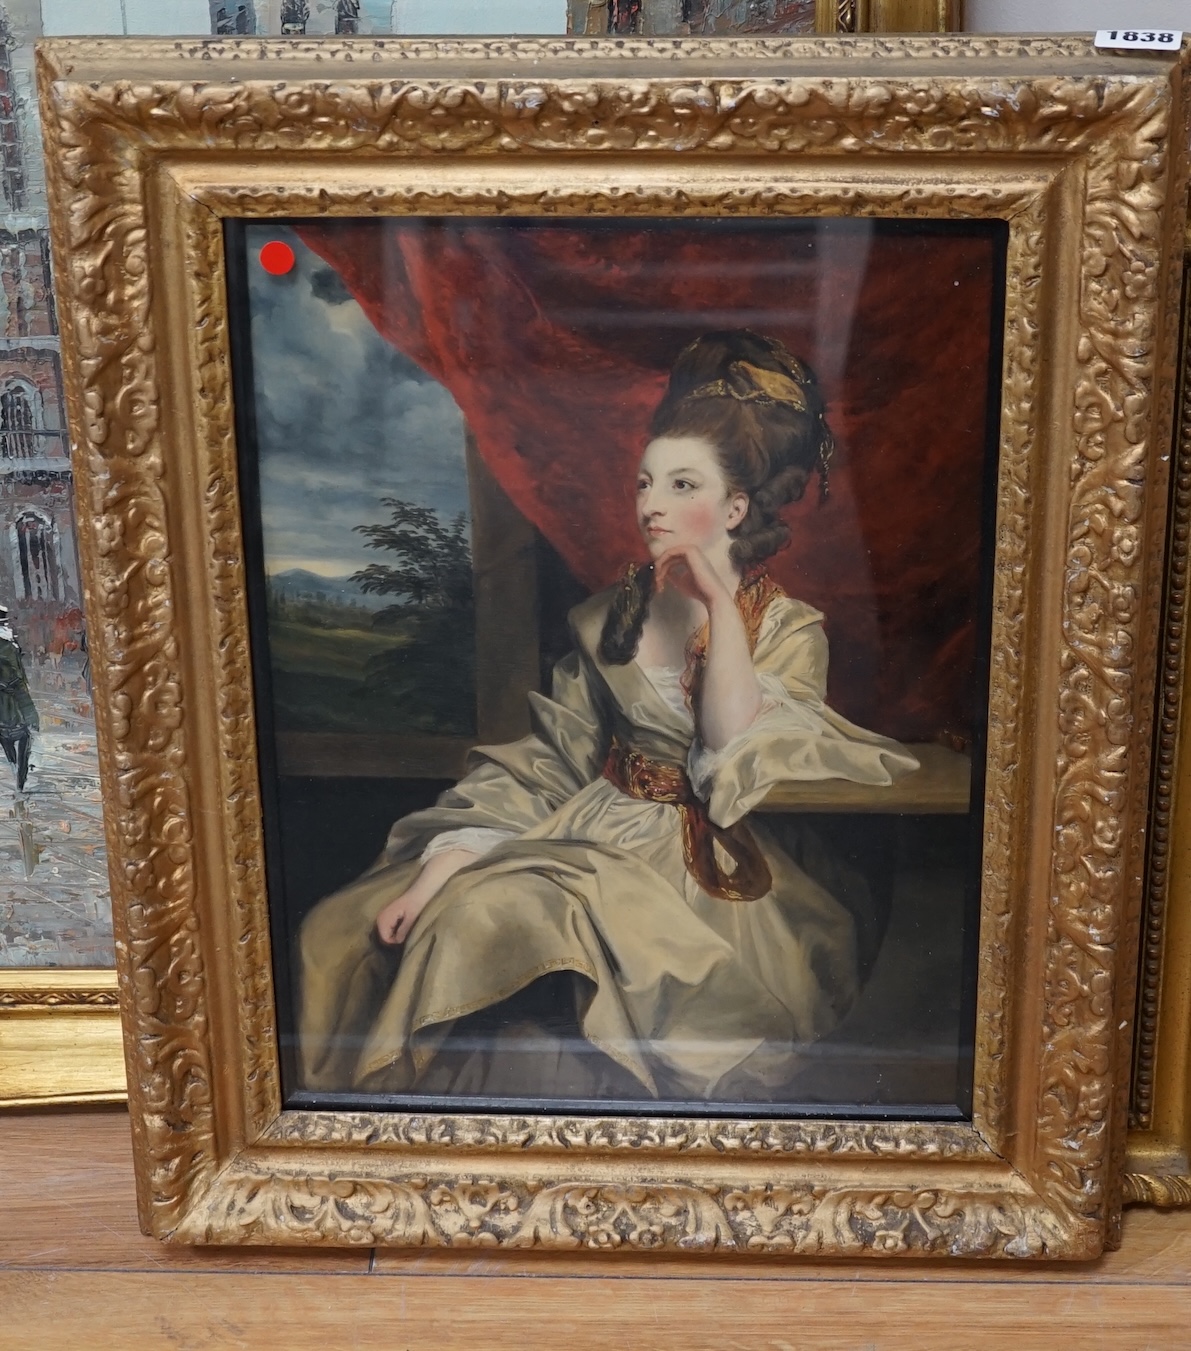 Late 18th / early 19th century, English School, oil, Portrait of a seated woman before a landscape, unsigned, 38 x 28cm. Condition - fair to good